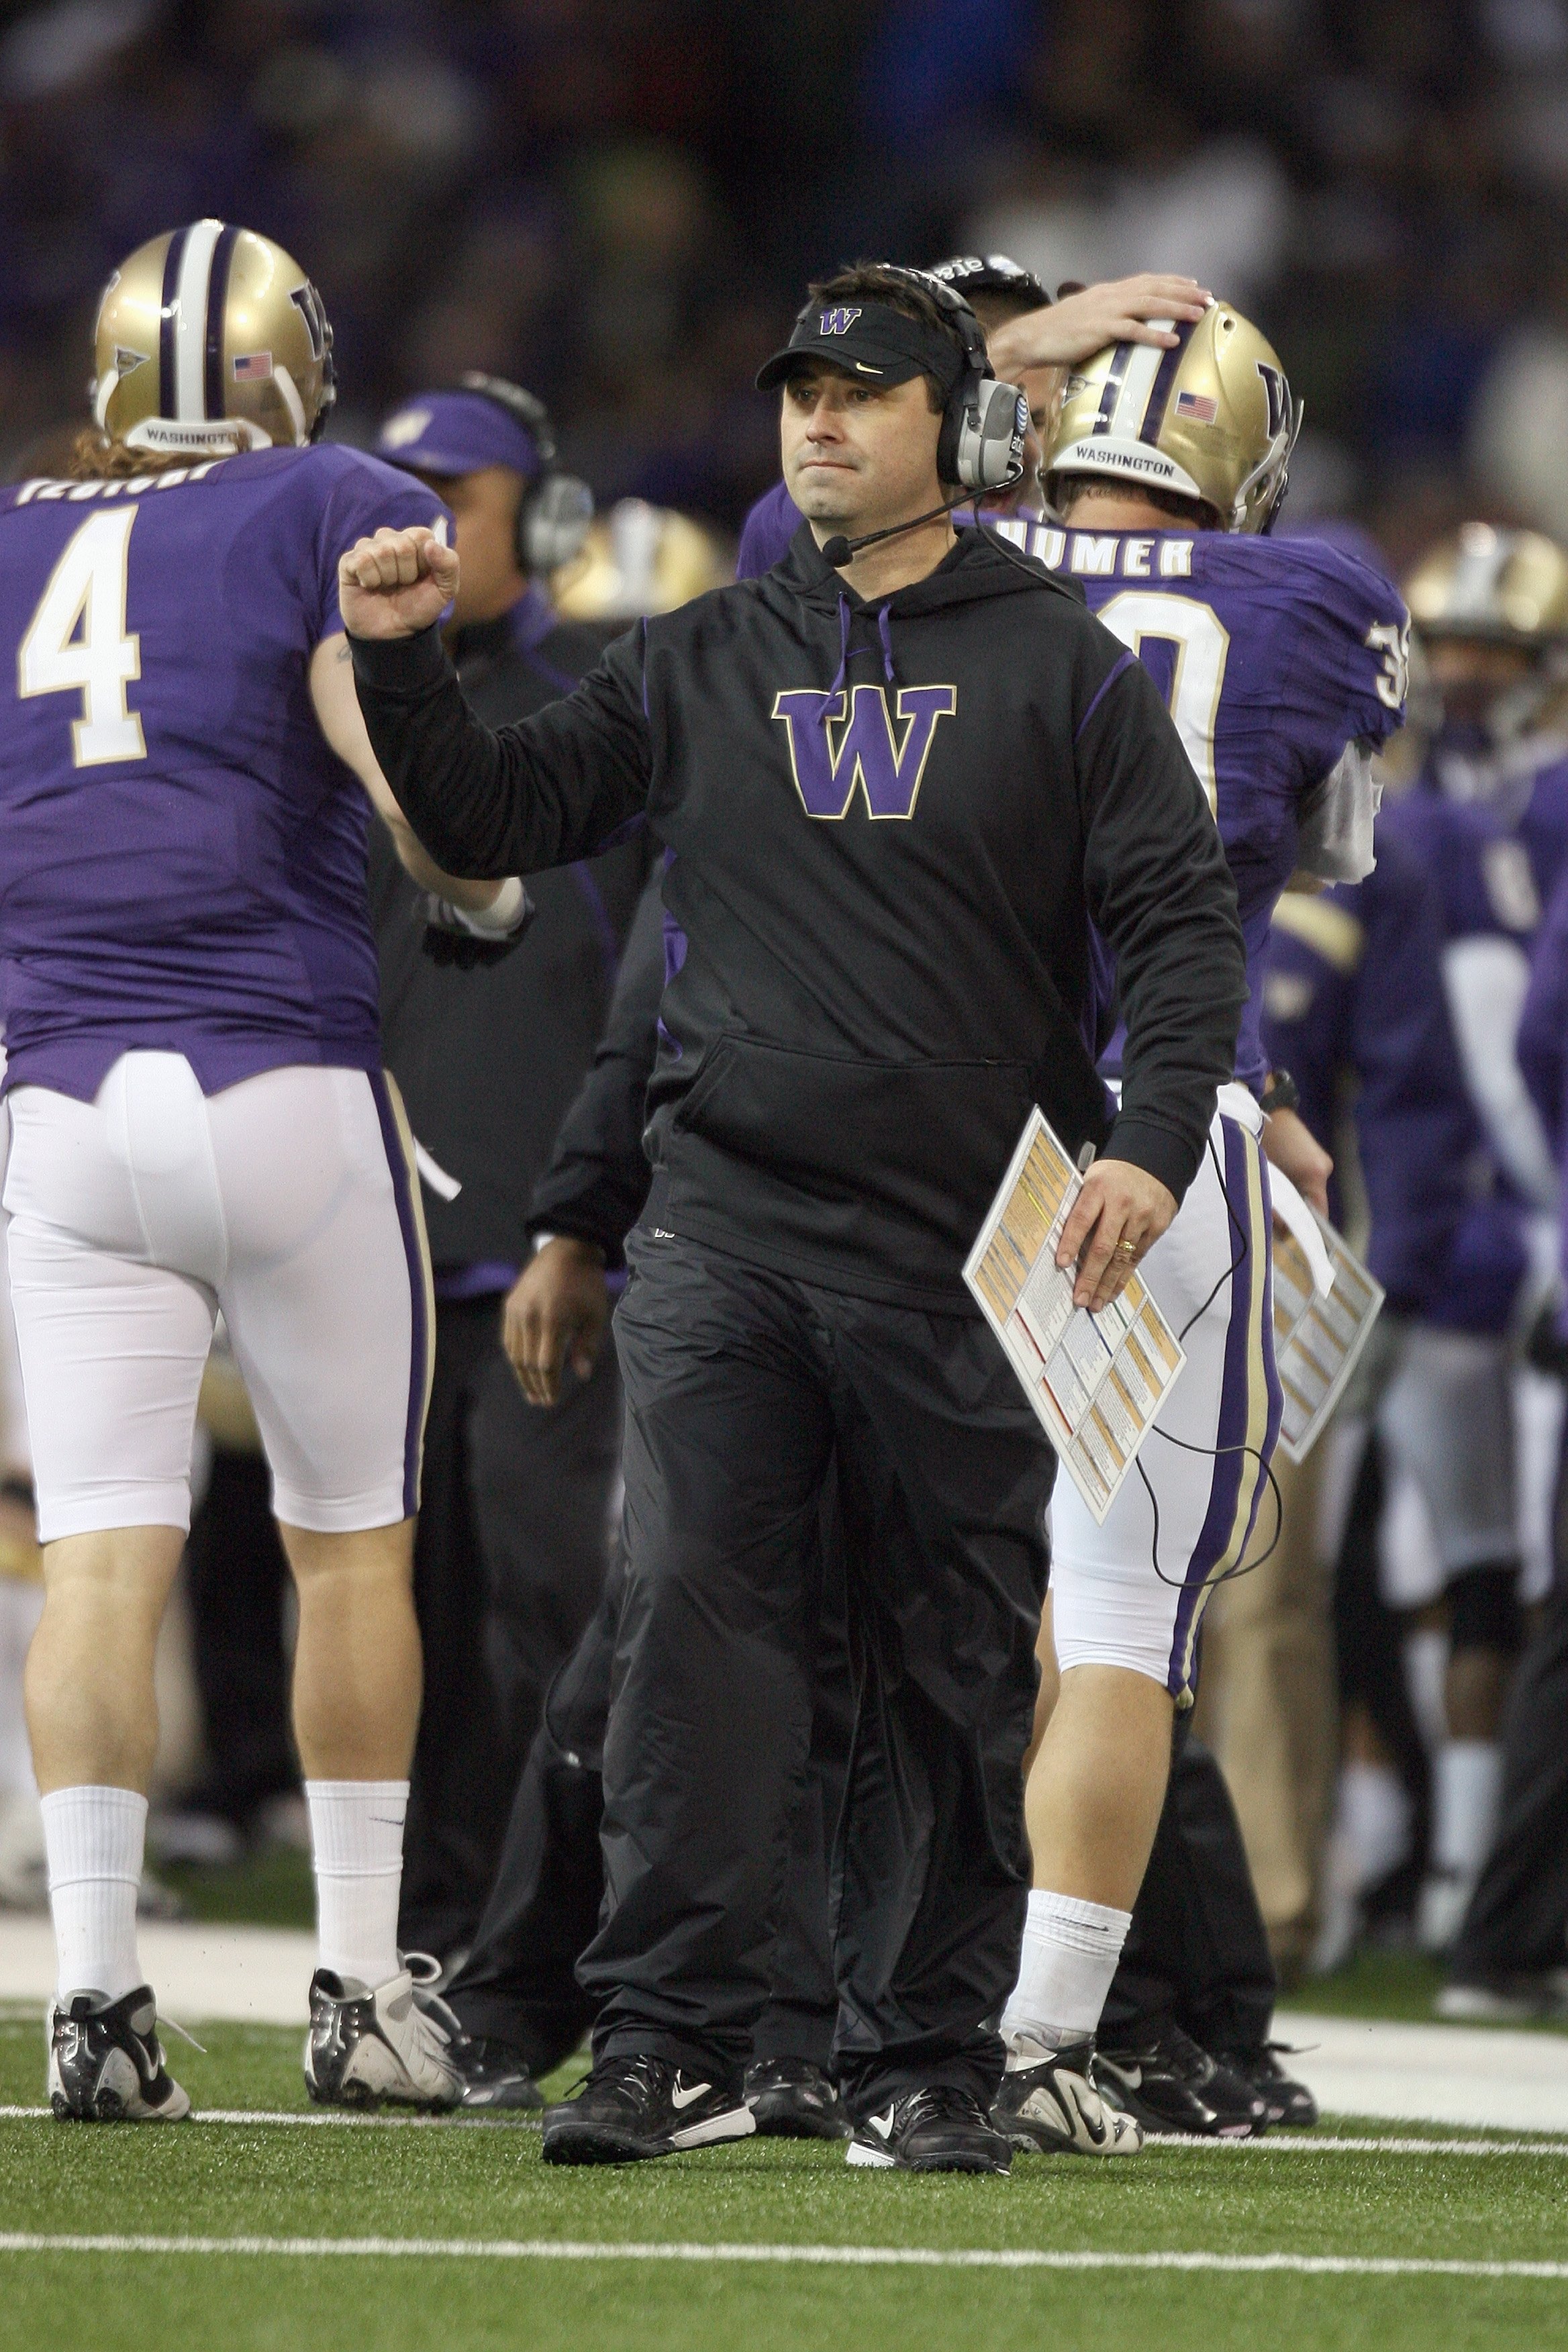 SEATTLE - DECEMBER 05:  Head coach Steve Sarkisian of the Washington Huskies motions from the sidelines during the game against the California Bears on December 5, 2009 at Husky Stadium in Seattle, Washington. The Huskies defeated the Bears 42-10. (Photo